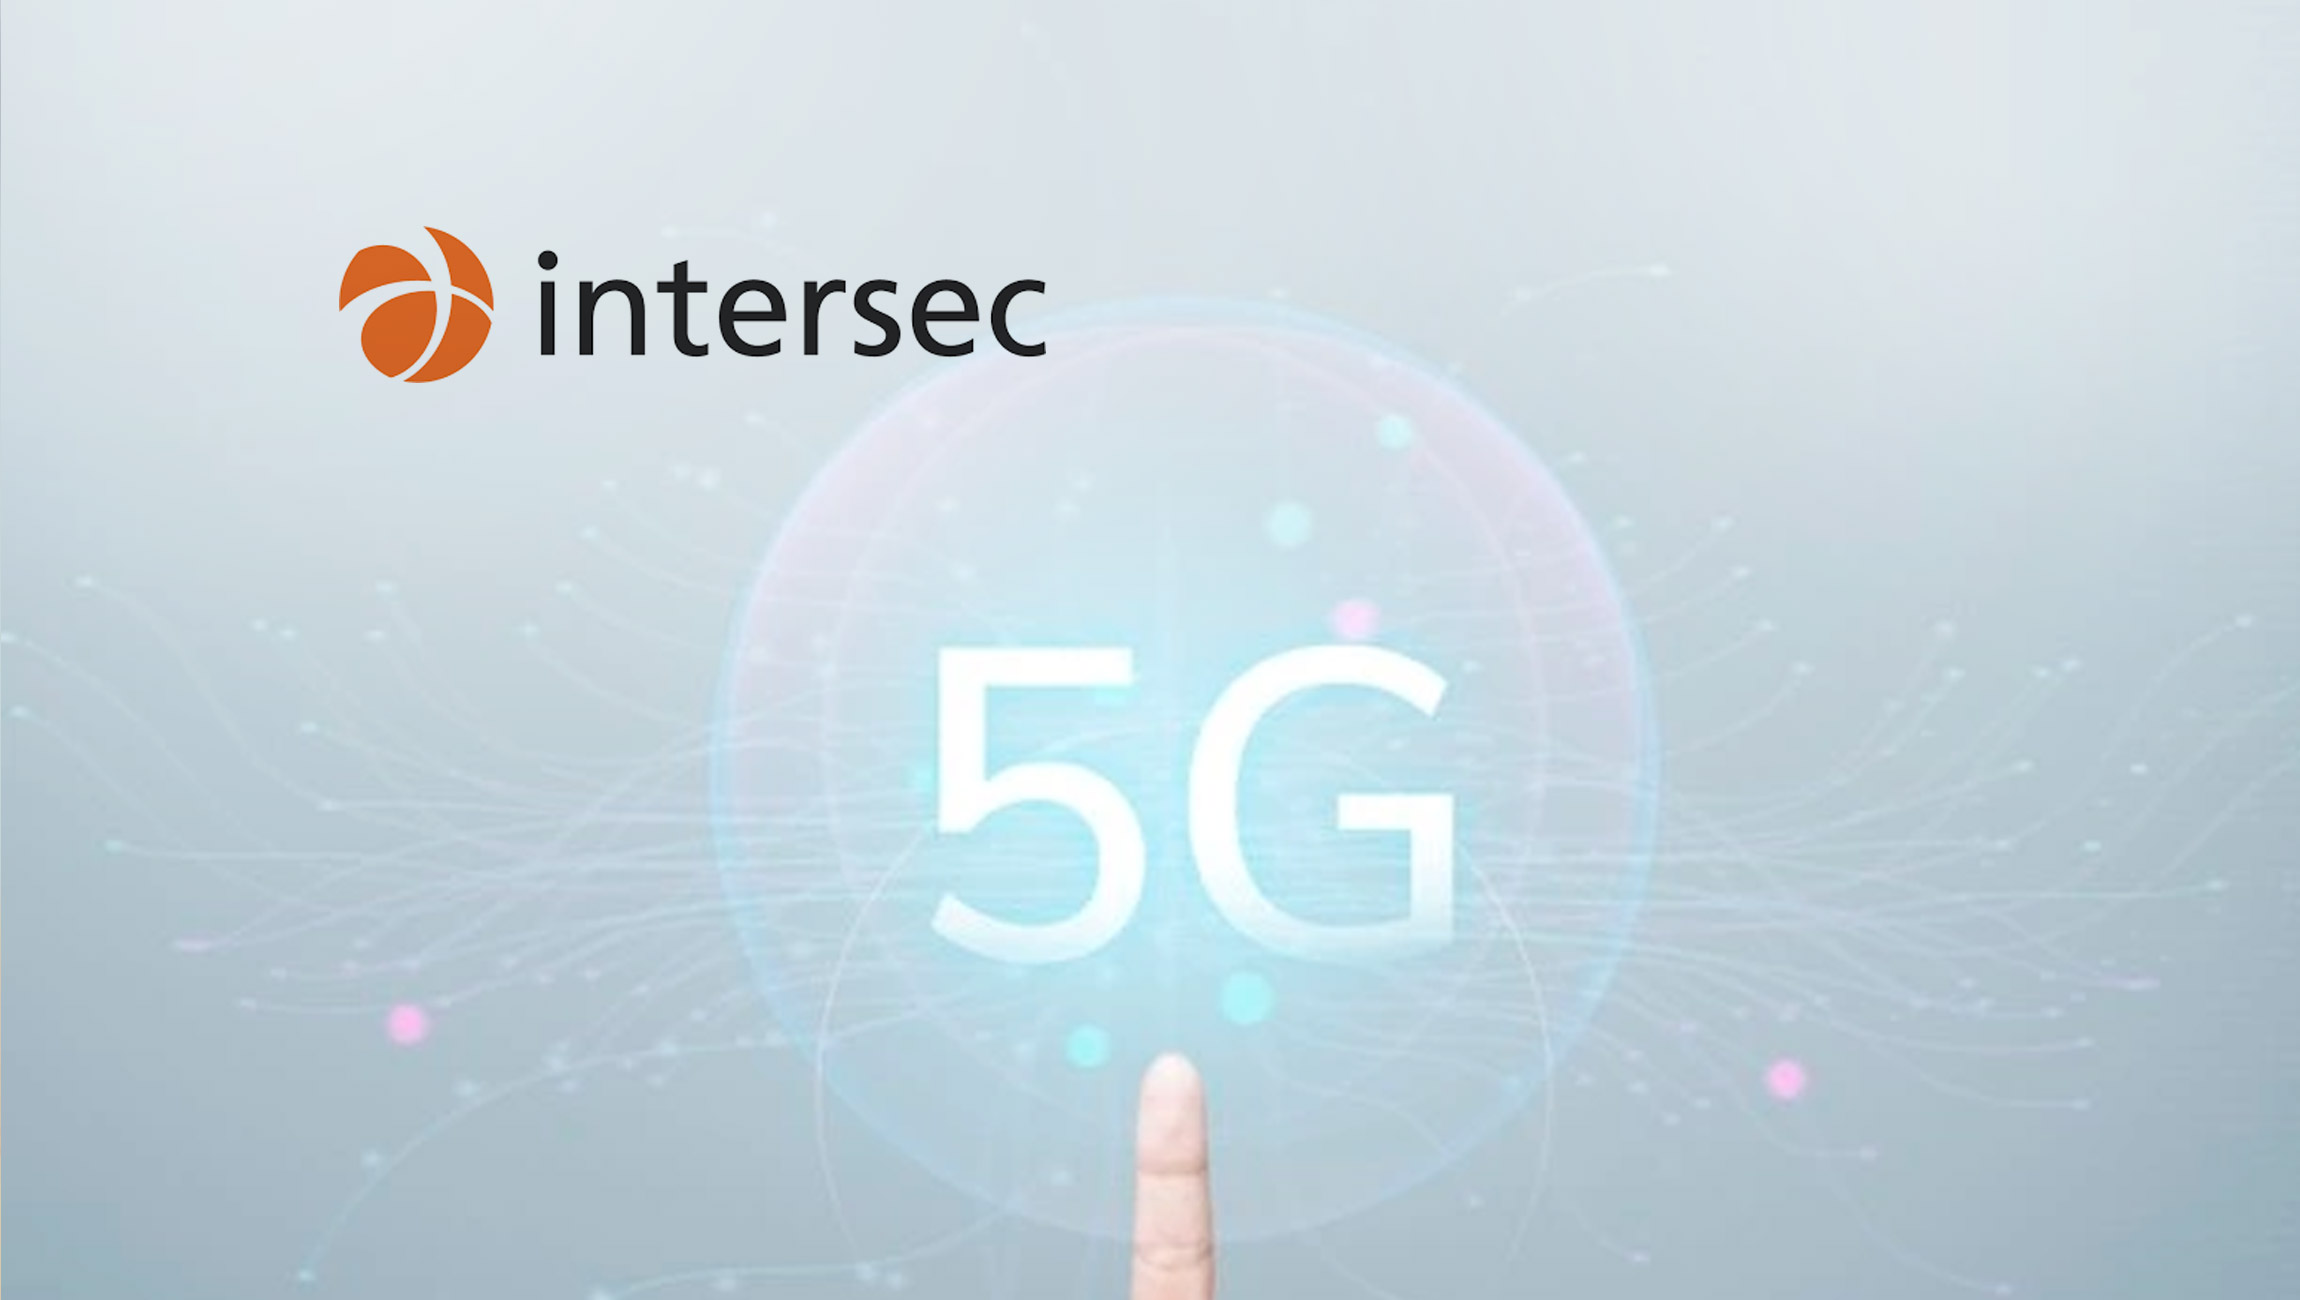 Intersec-5G-ready-geolocation-platform-accelerates-positioning-use-case-enablement